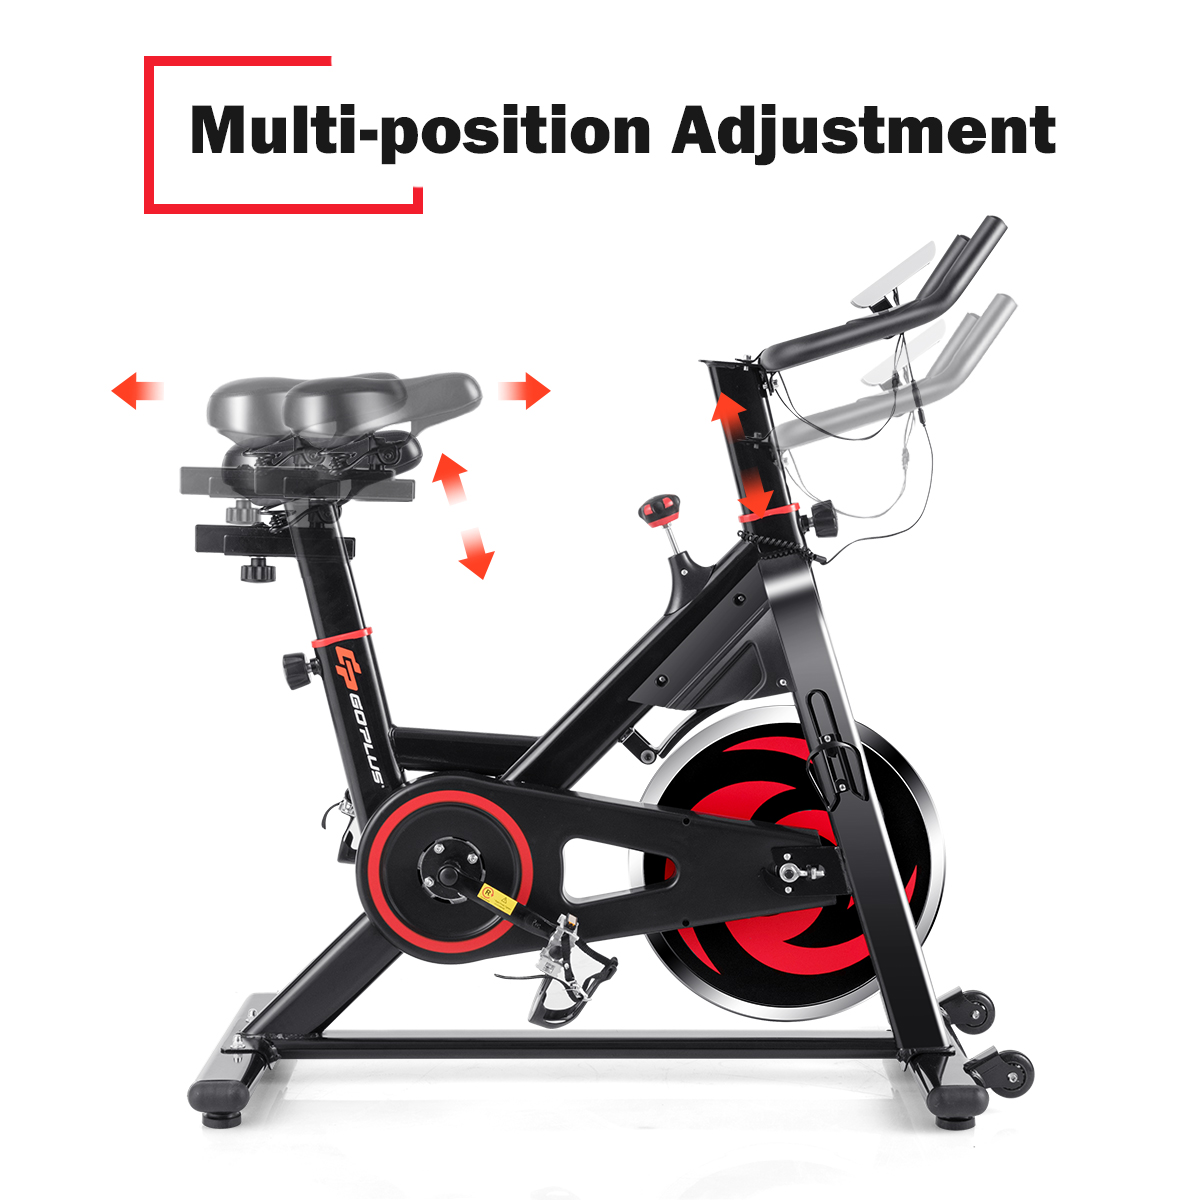 Stationary Exercise Magnetic Cycling Bike 30Lbs Flywheel Home Gym Cardio Workout - image 10 of 10